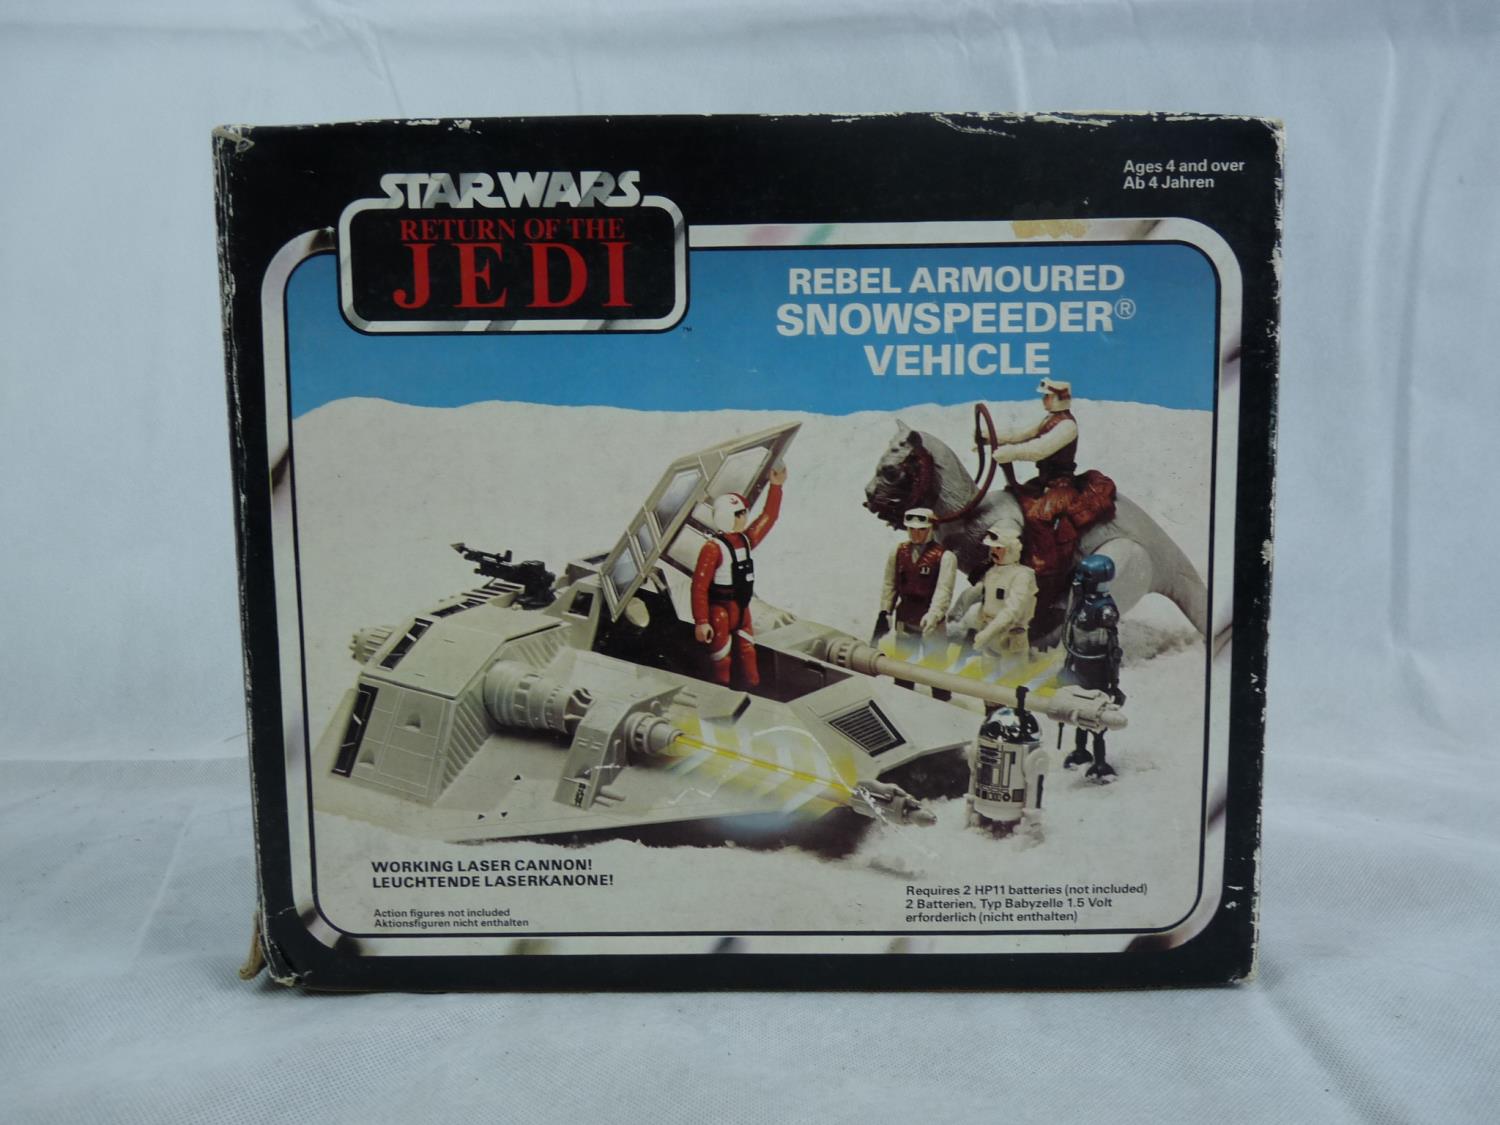 French Star Wars Return of the Jedi Rebel Armoured Snow Speeder Vehicle boxed